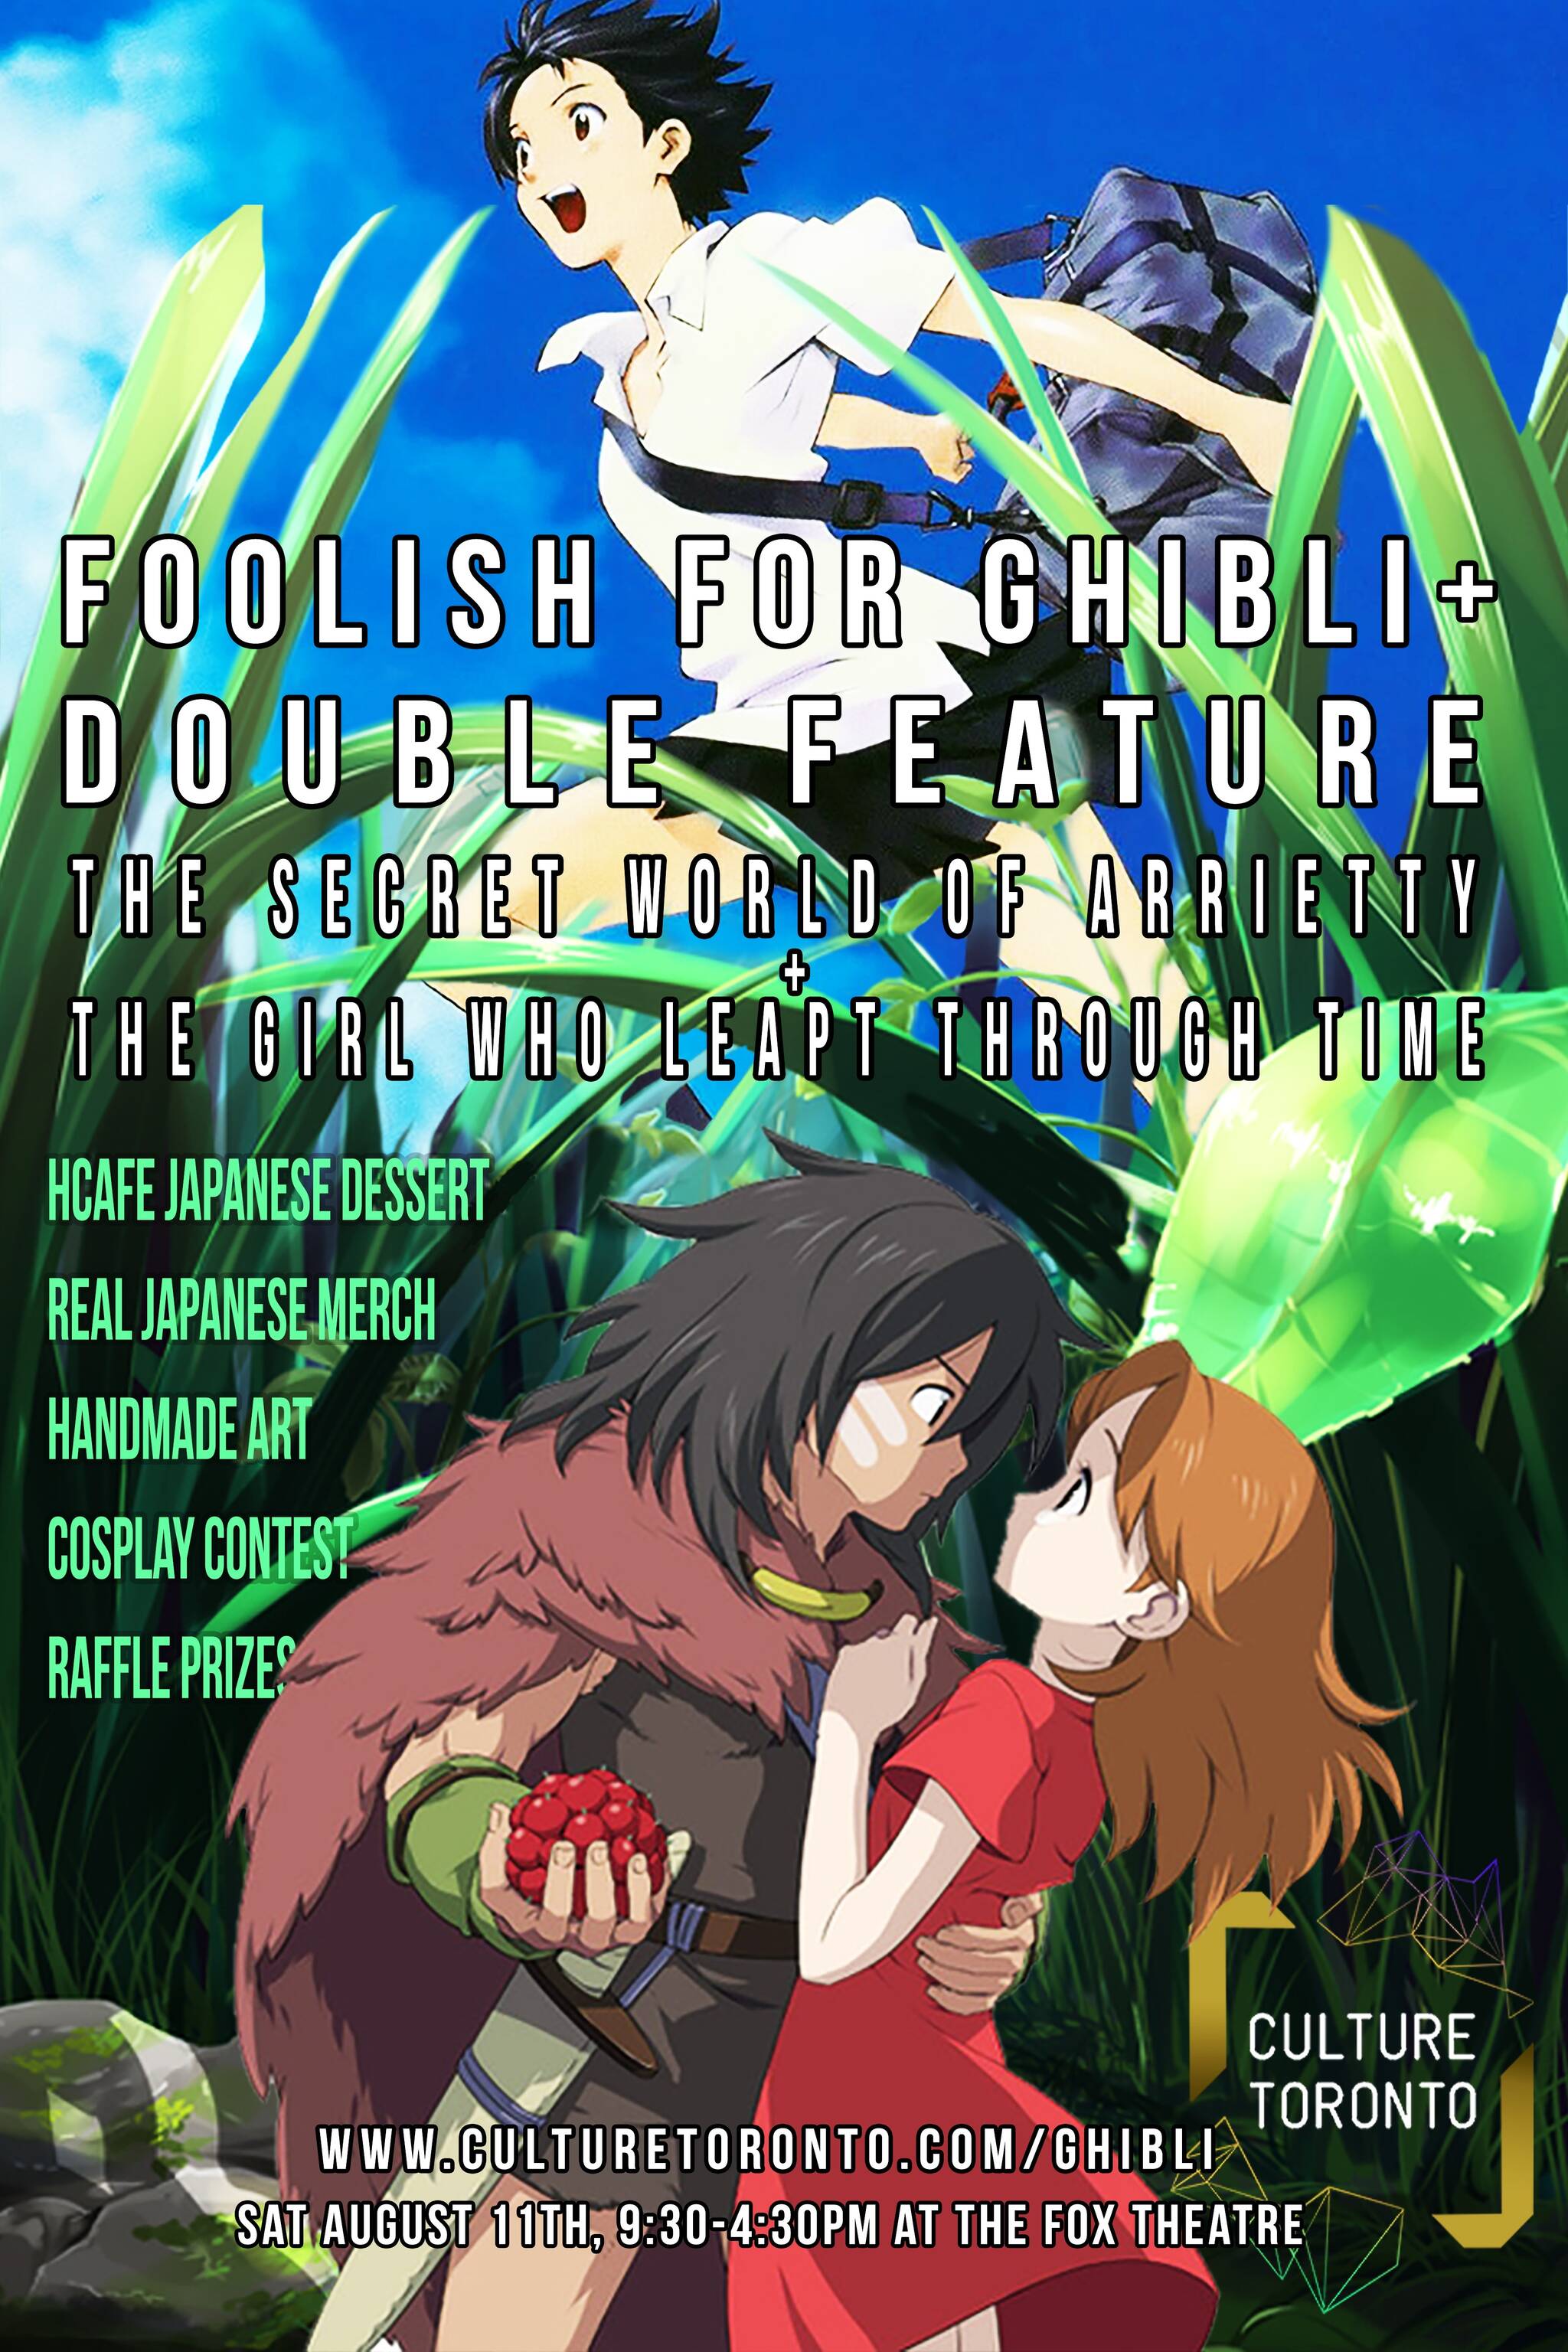 Foolish For Ghibli Double Feature! 2 Movies, Japanese Cheesecake, Nintendo  Raffle, Cosplay Contest, Mixer and more PLUS